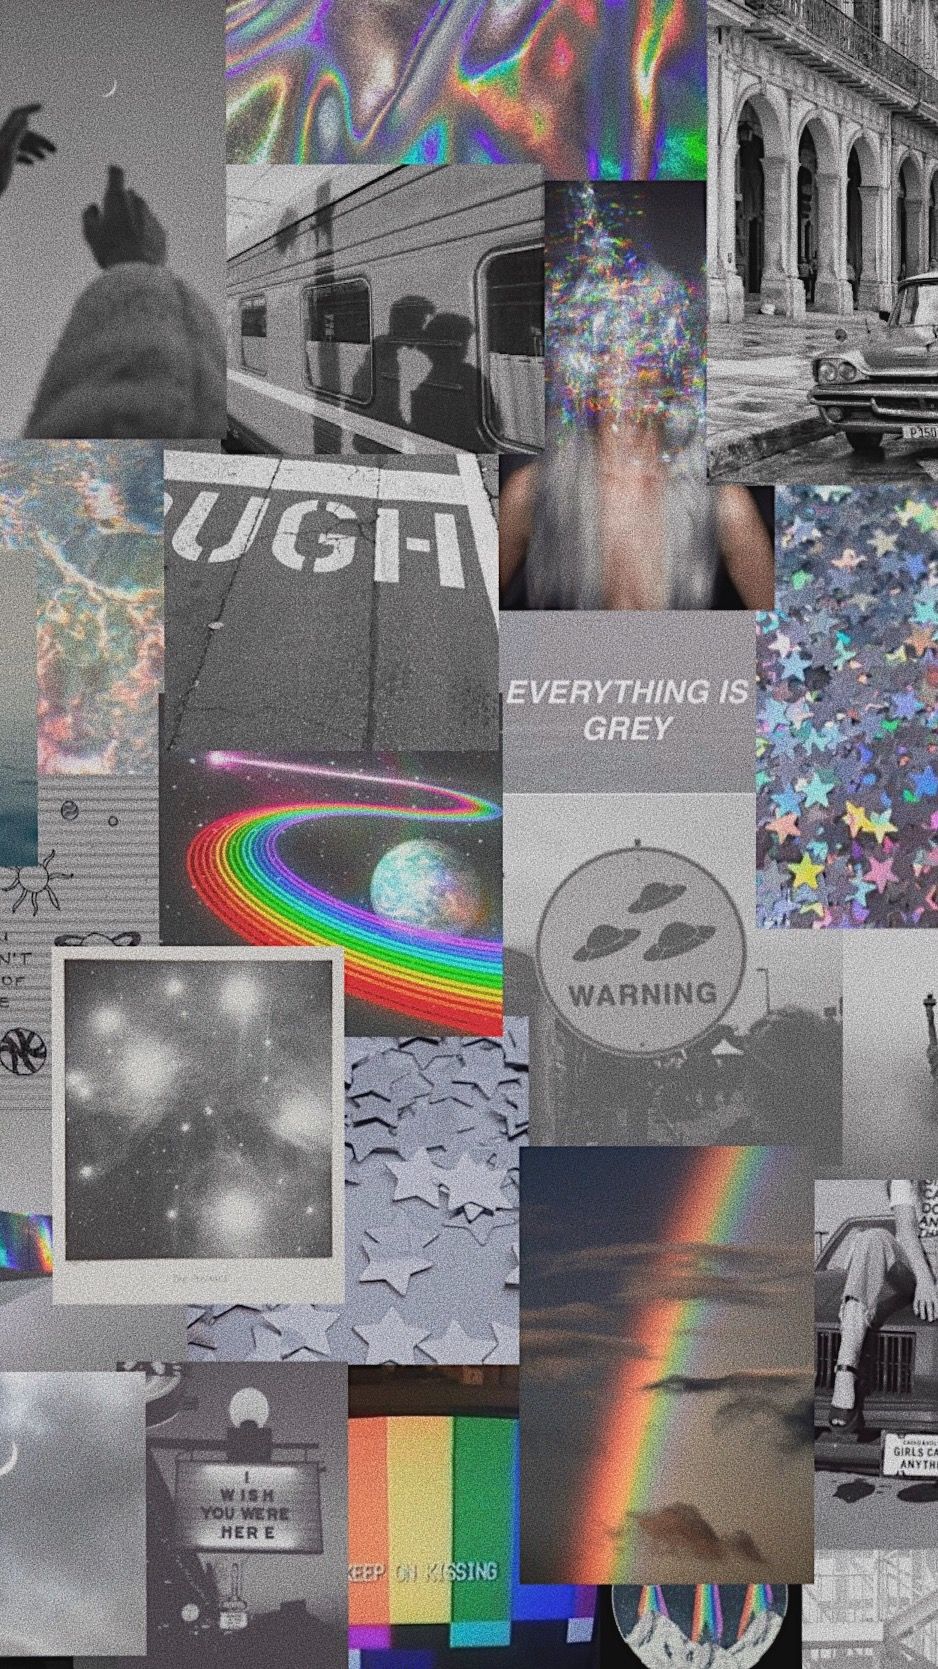 A collage of pictures with rainbow in the middle - Rainbows, gray, colorful